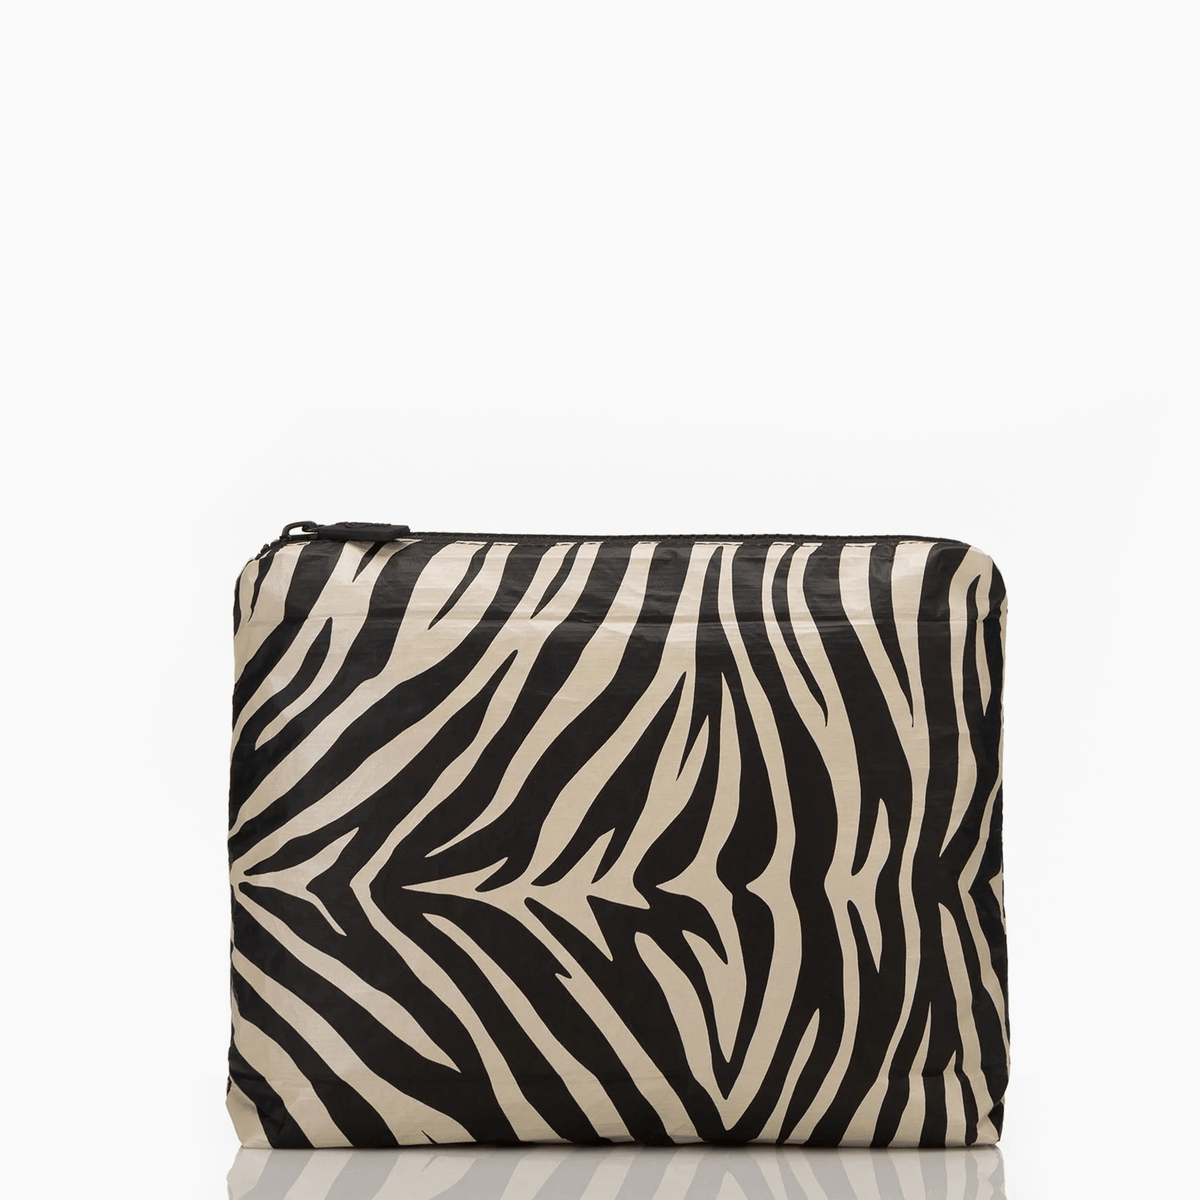 Aloha Eye of the Tiger small pouch